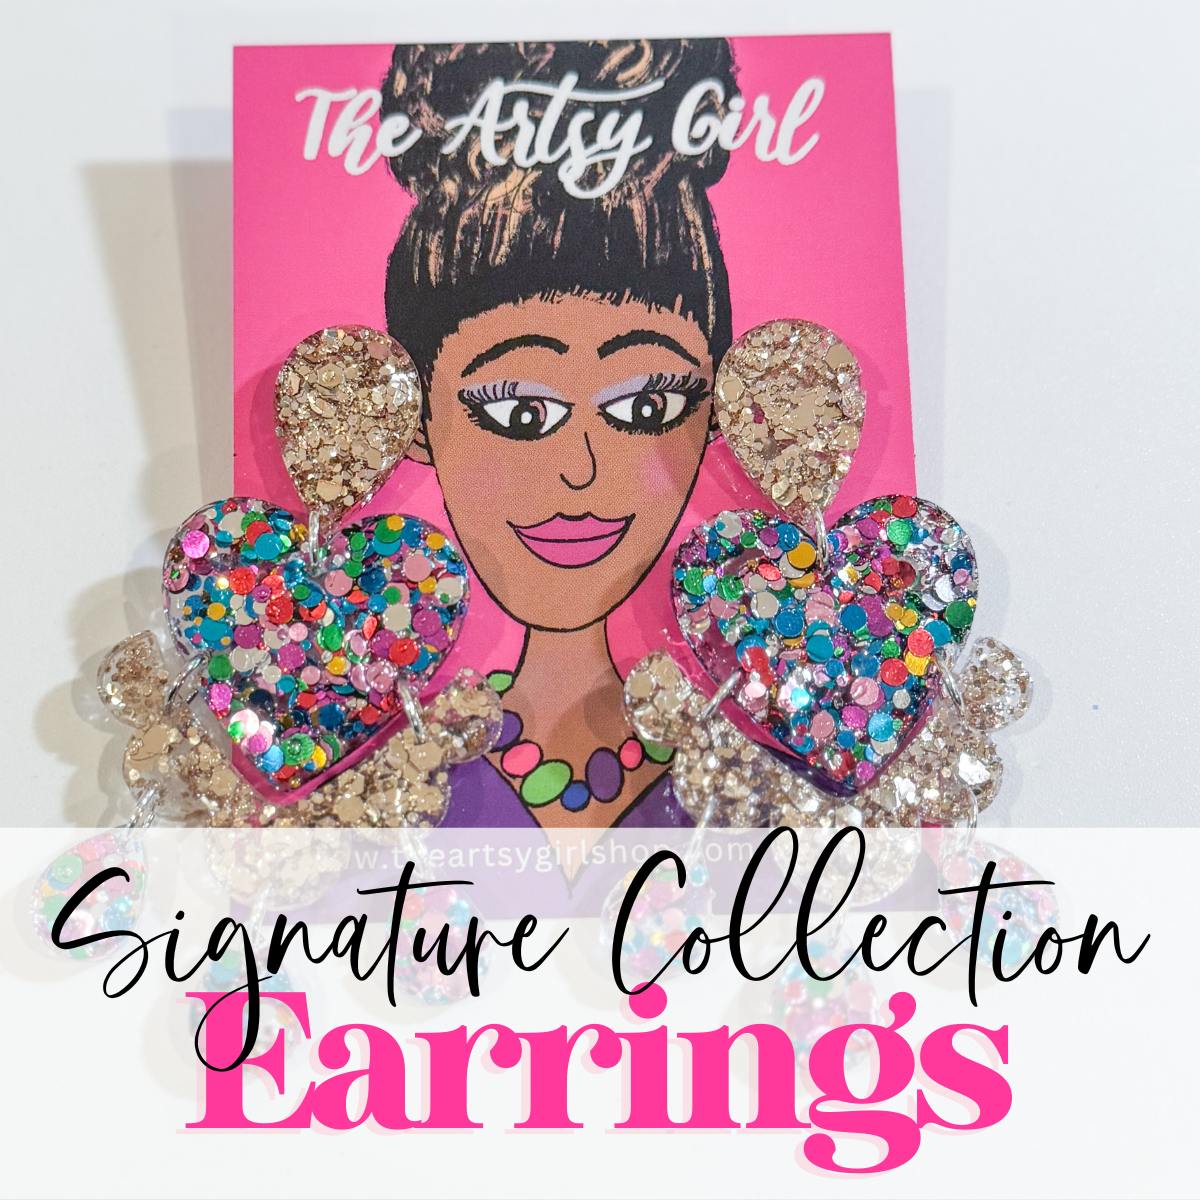 The Signature Collection Earrings